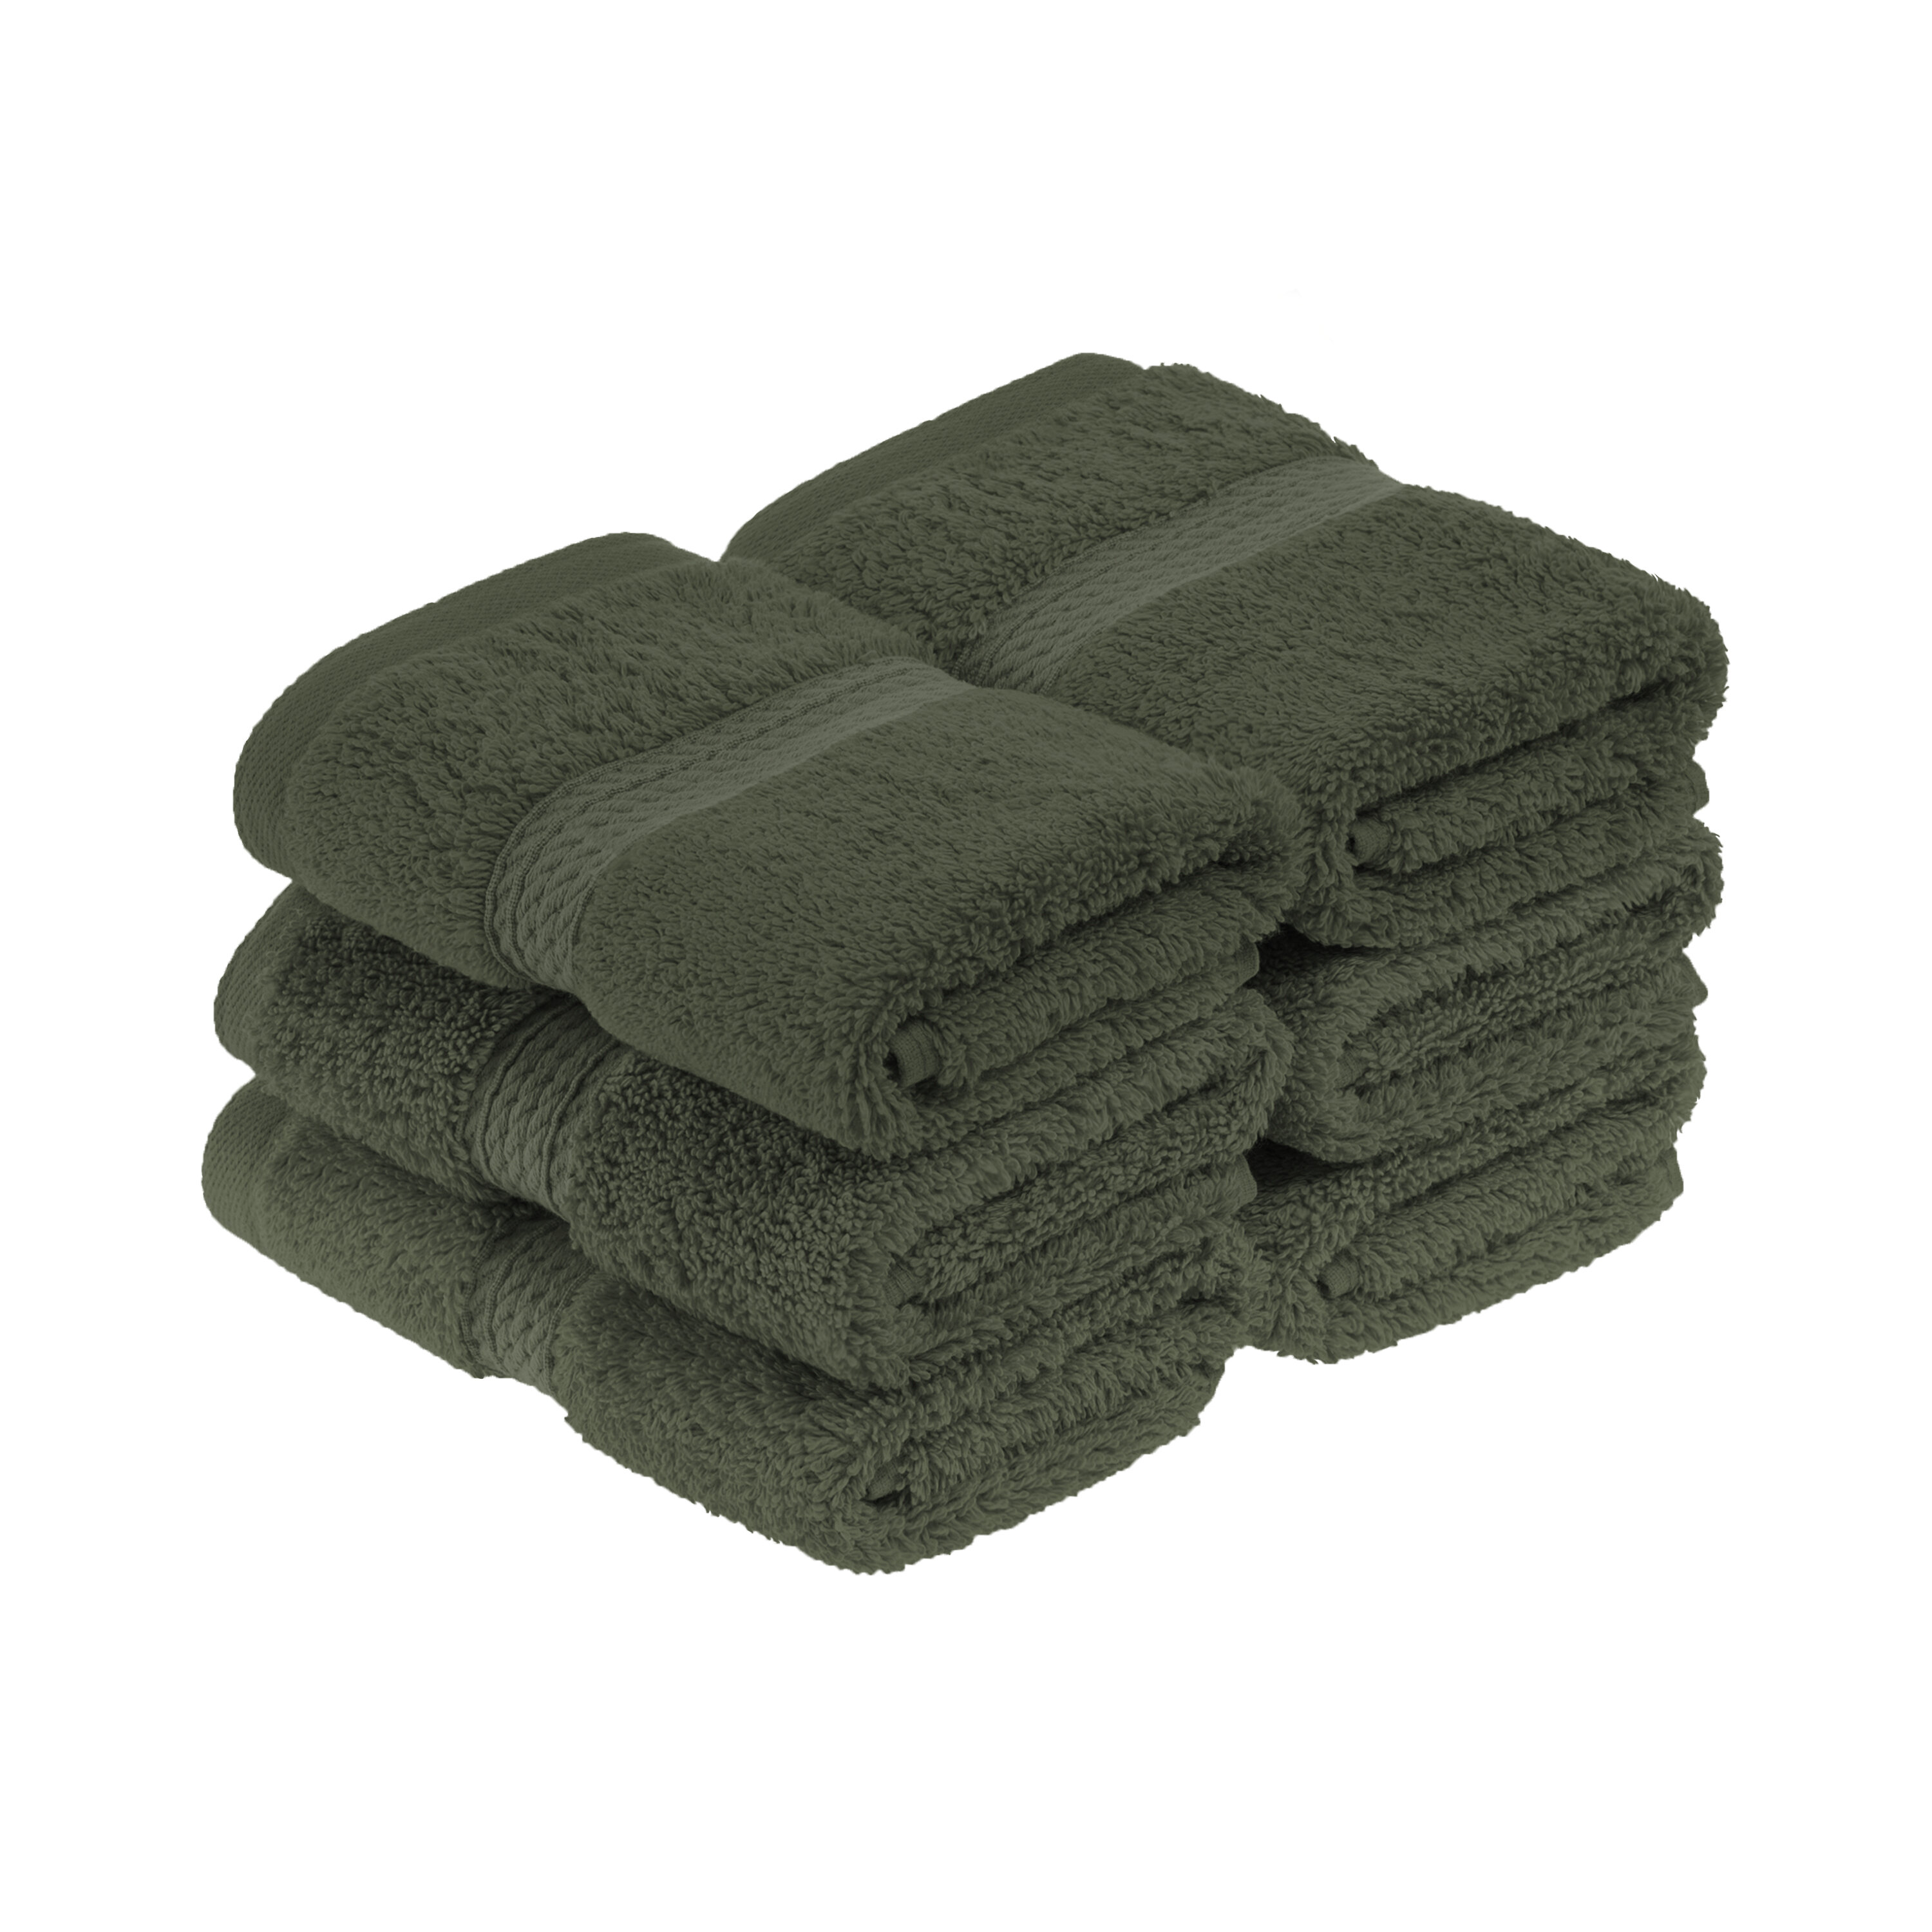 900 GSM Egyptian Cotton Towel Set of 8, Plush Absorbent Face, Hand